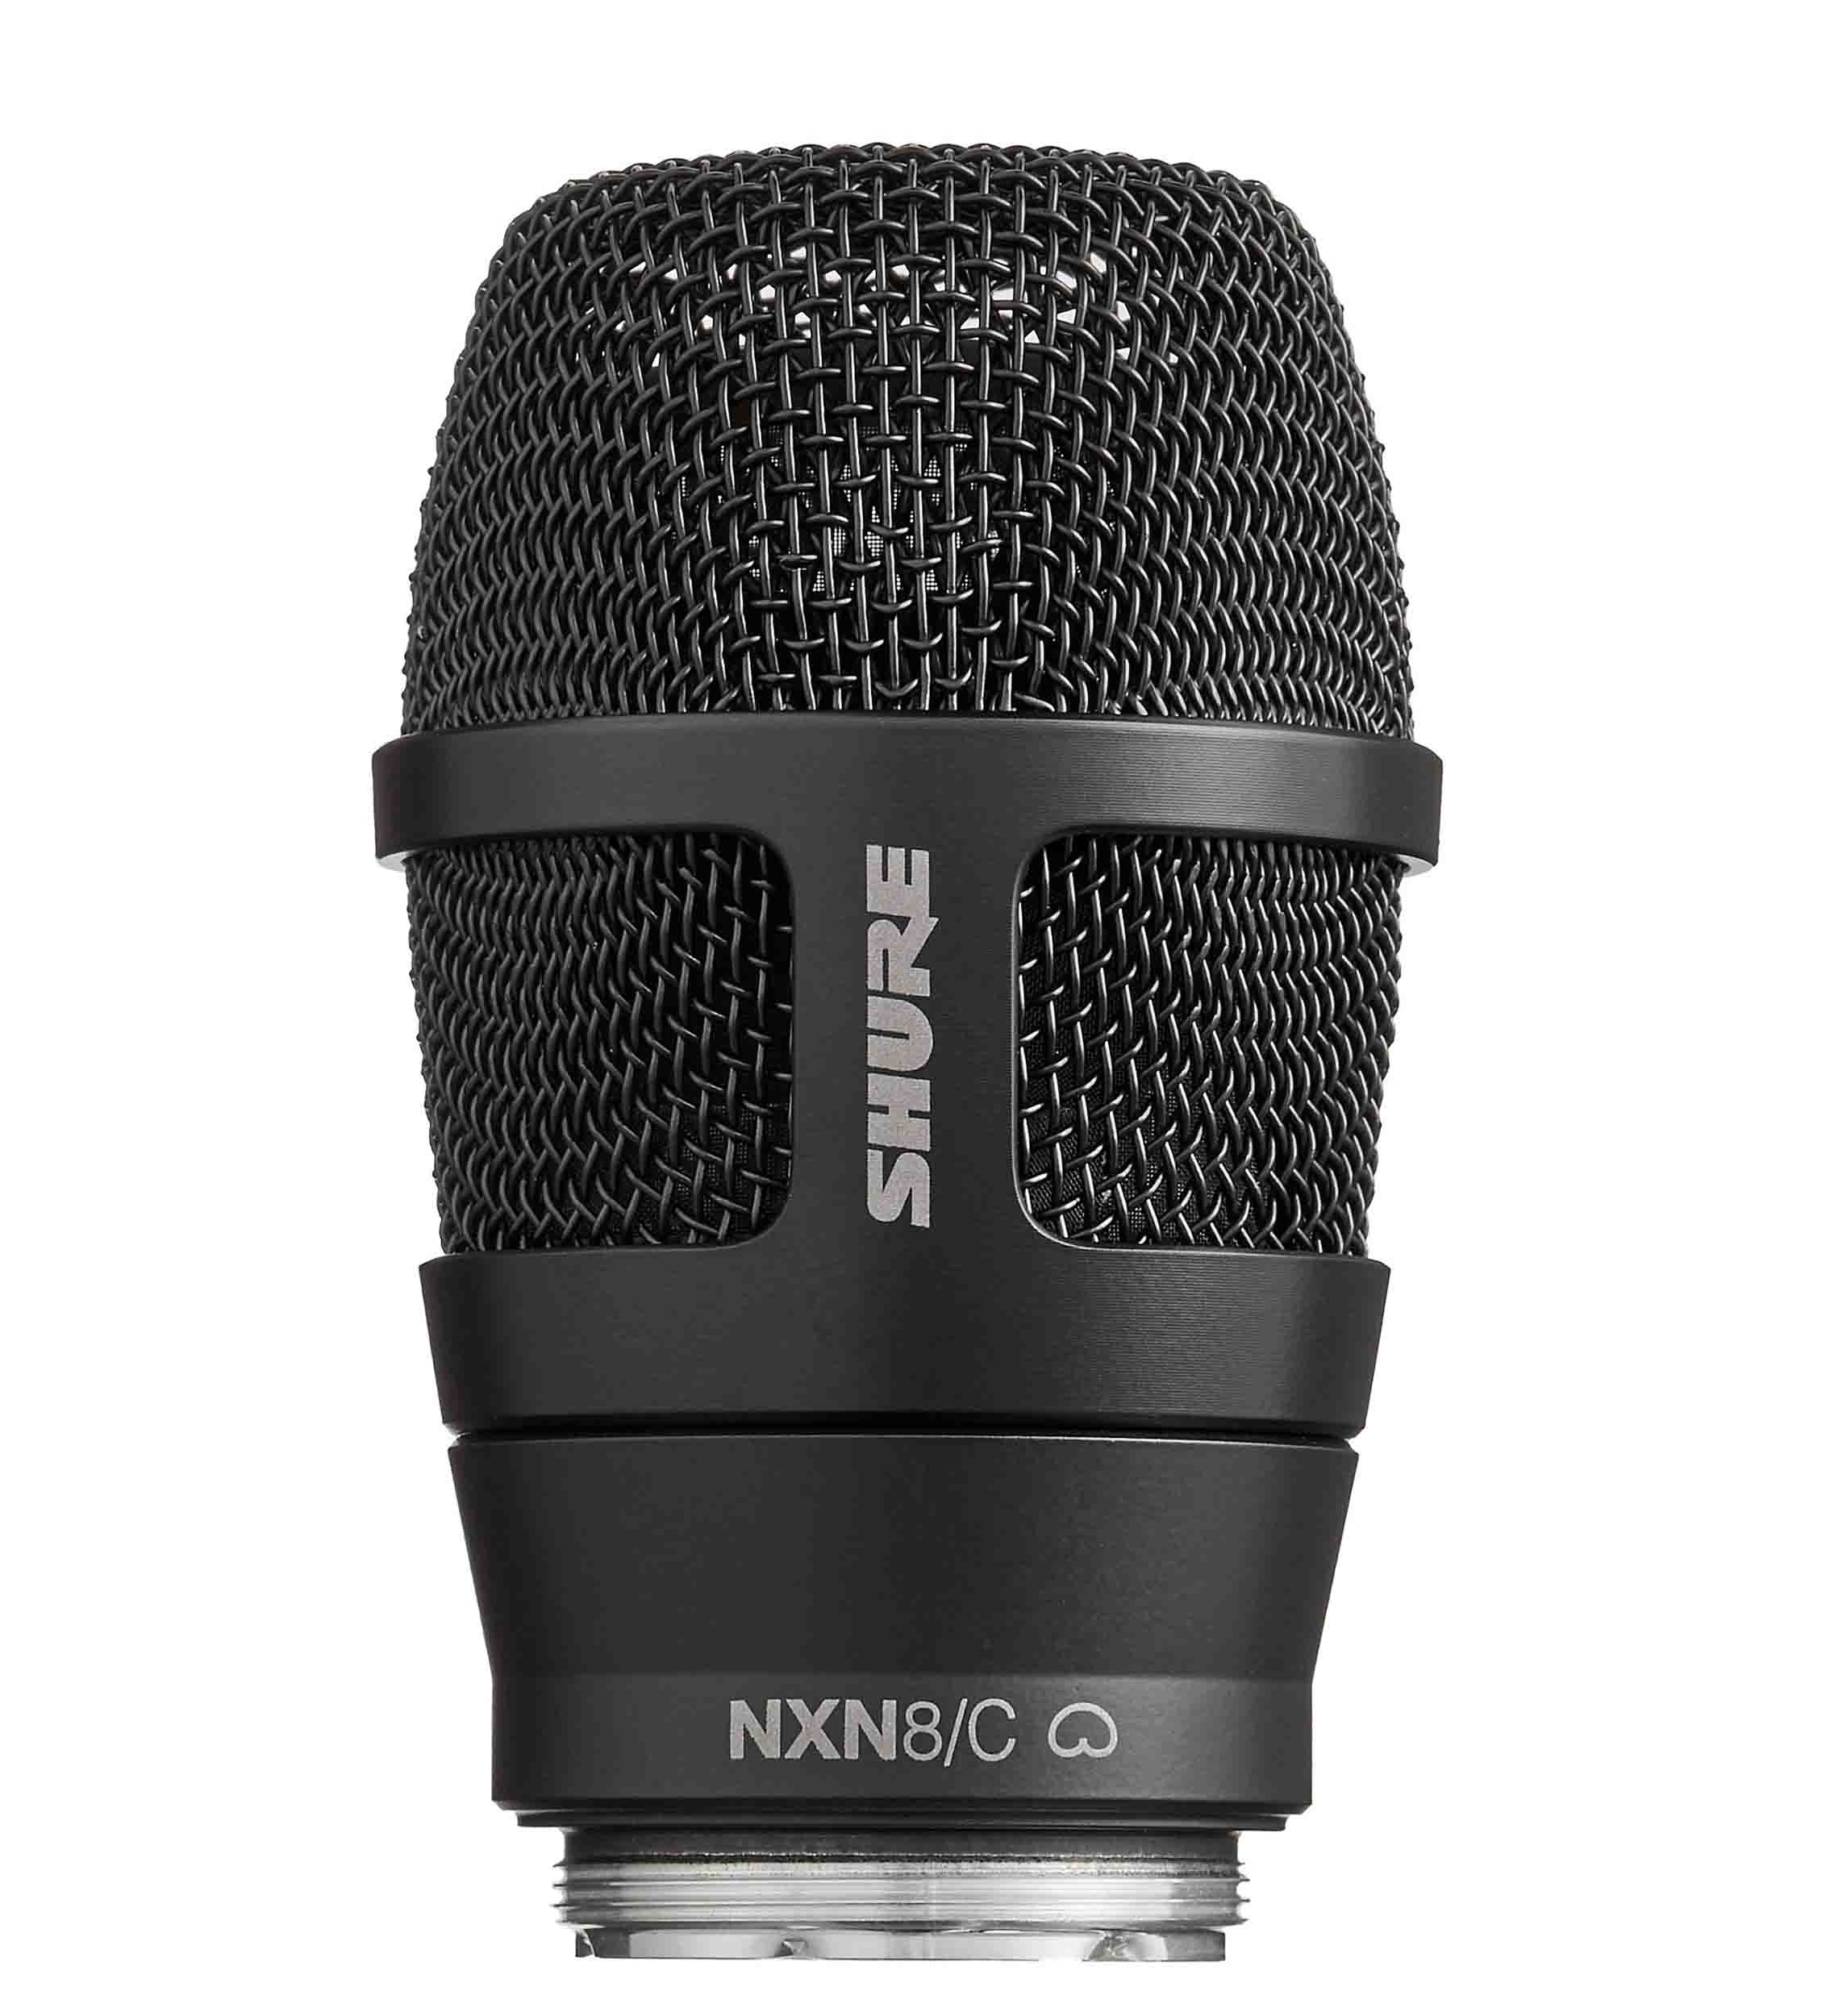 Shure RPW200, Wireless Cardioid Dynamic Vocal Microphone Capsule - Black by Shure